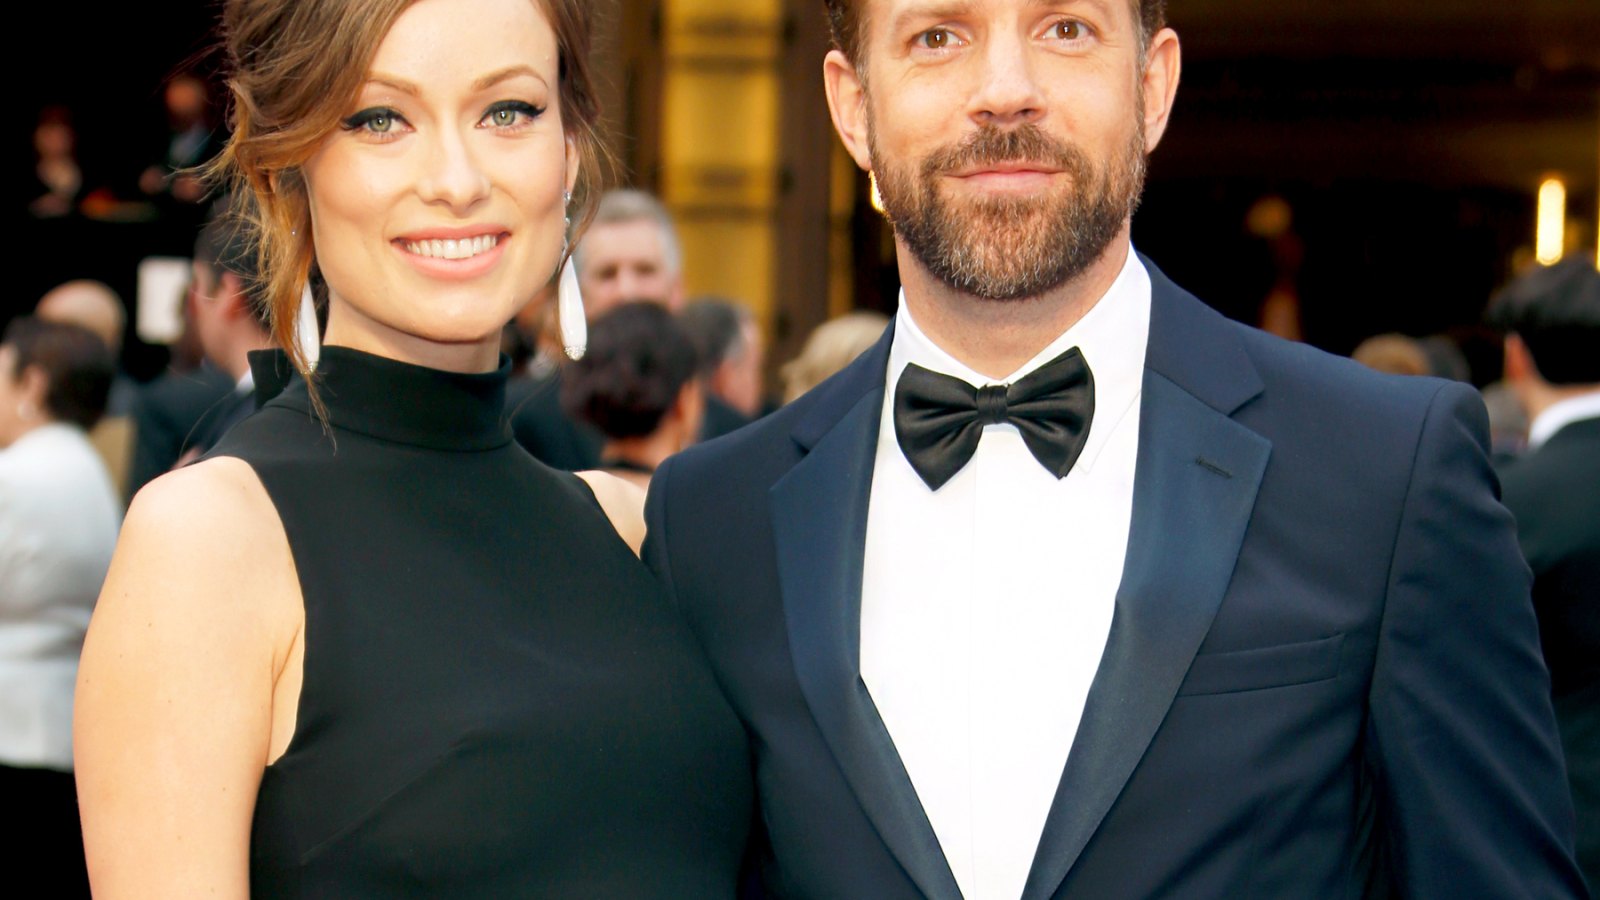 Olivia Wilde and Jason Sudeikis welcome their first child, a baby boy!